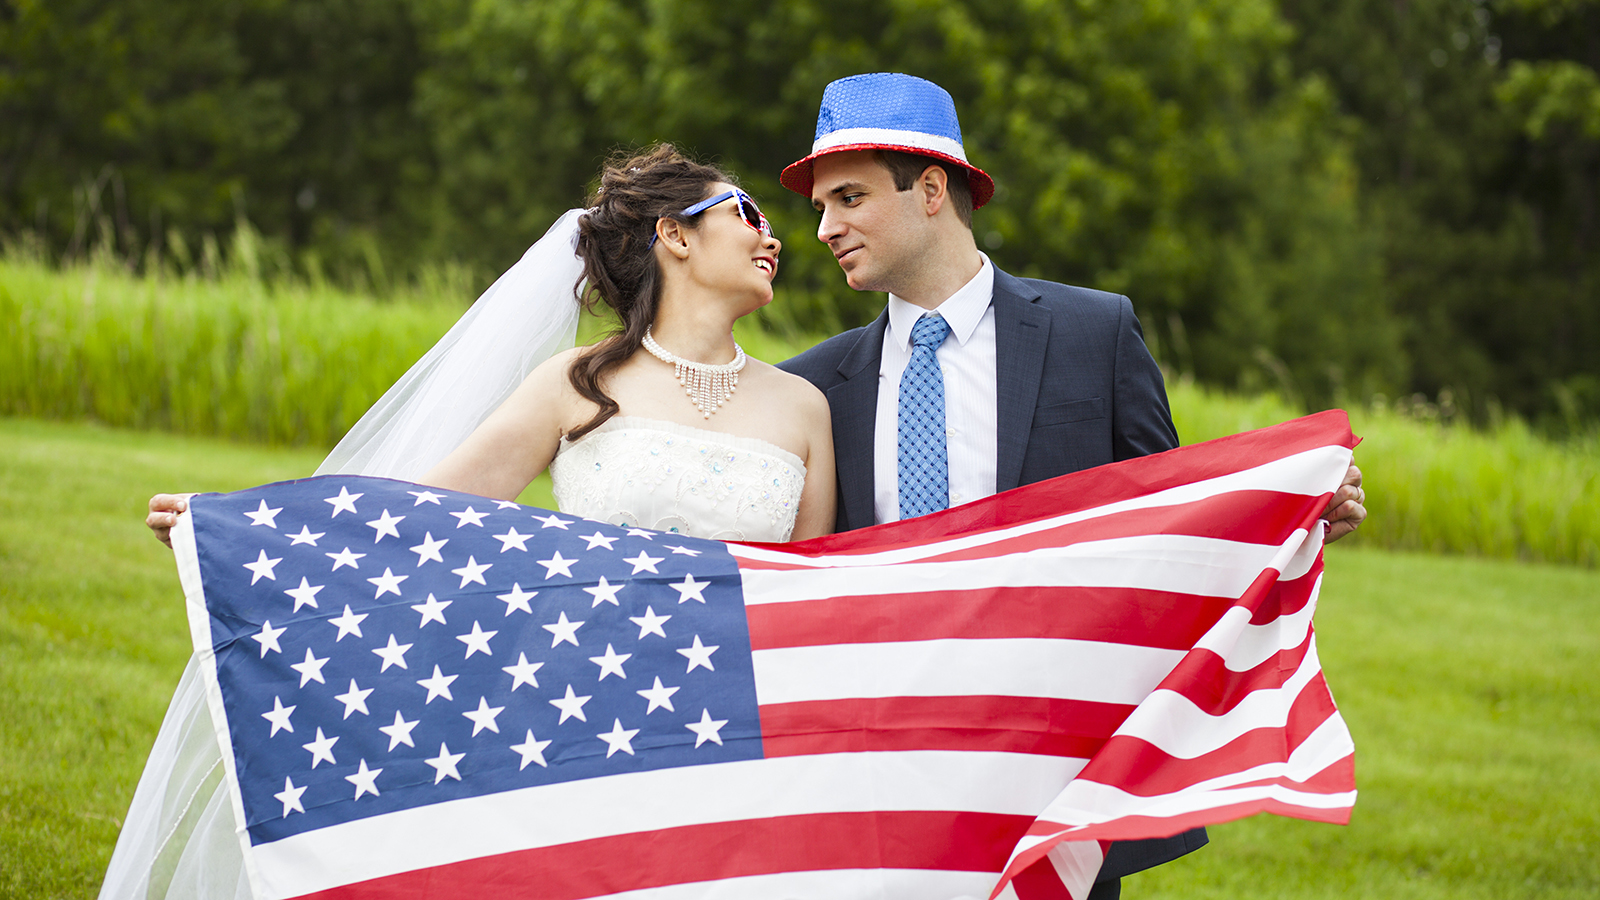 Patriotic holiday married couple with American flag for july 4th